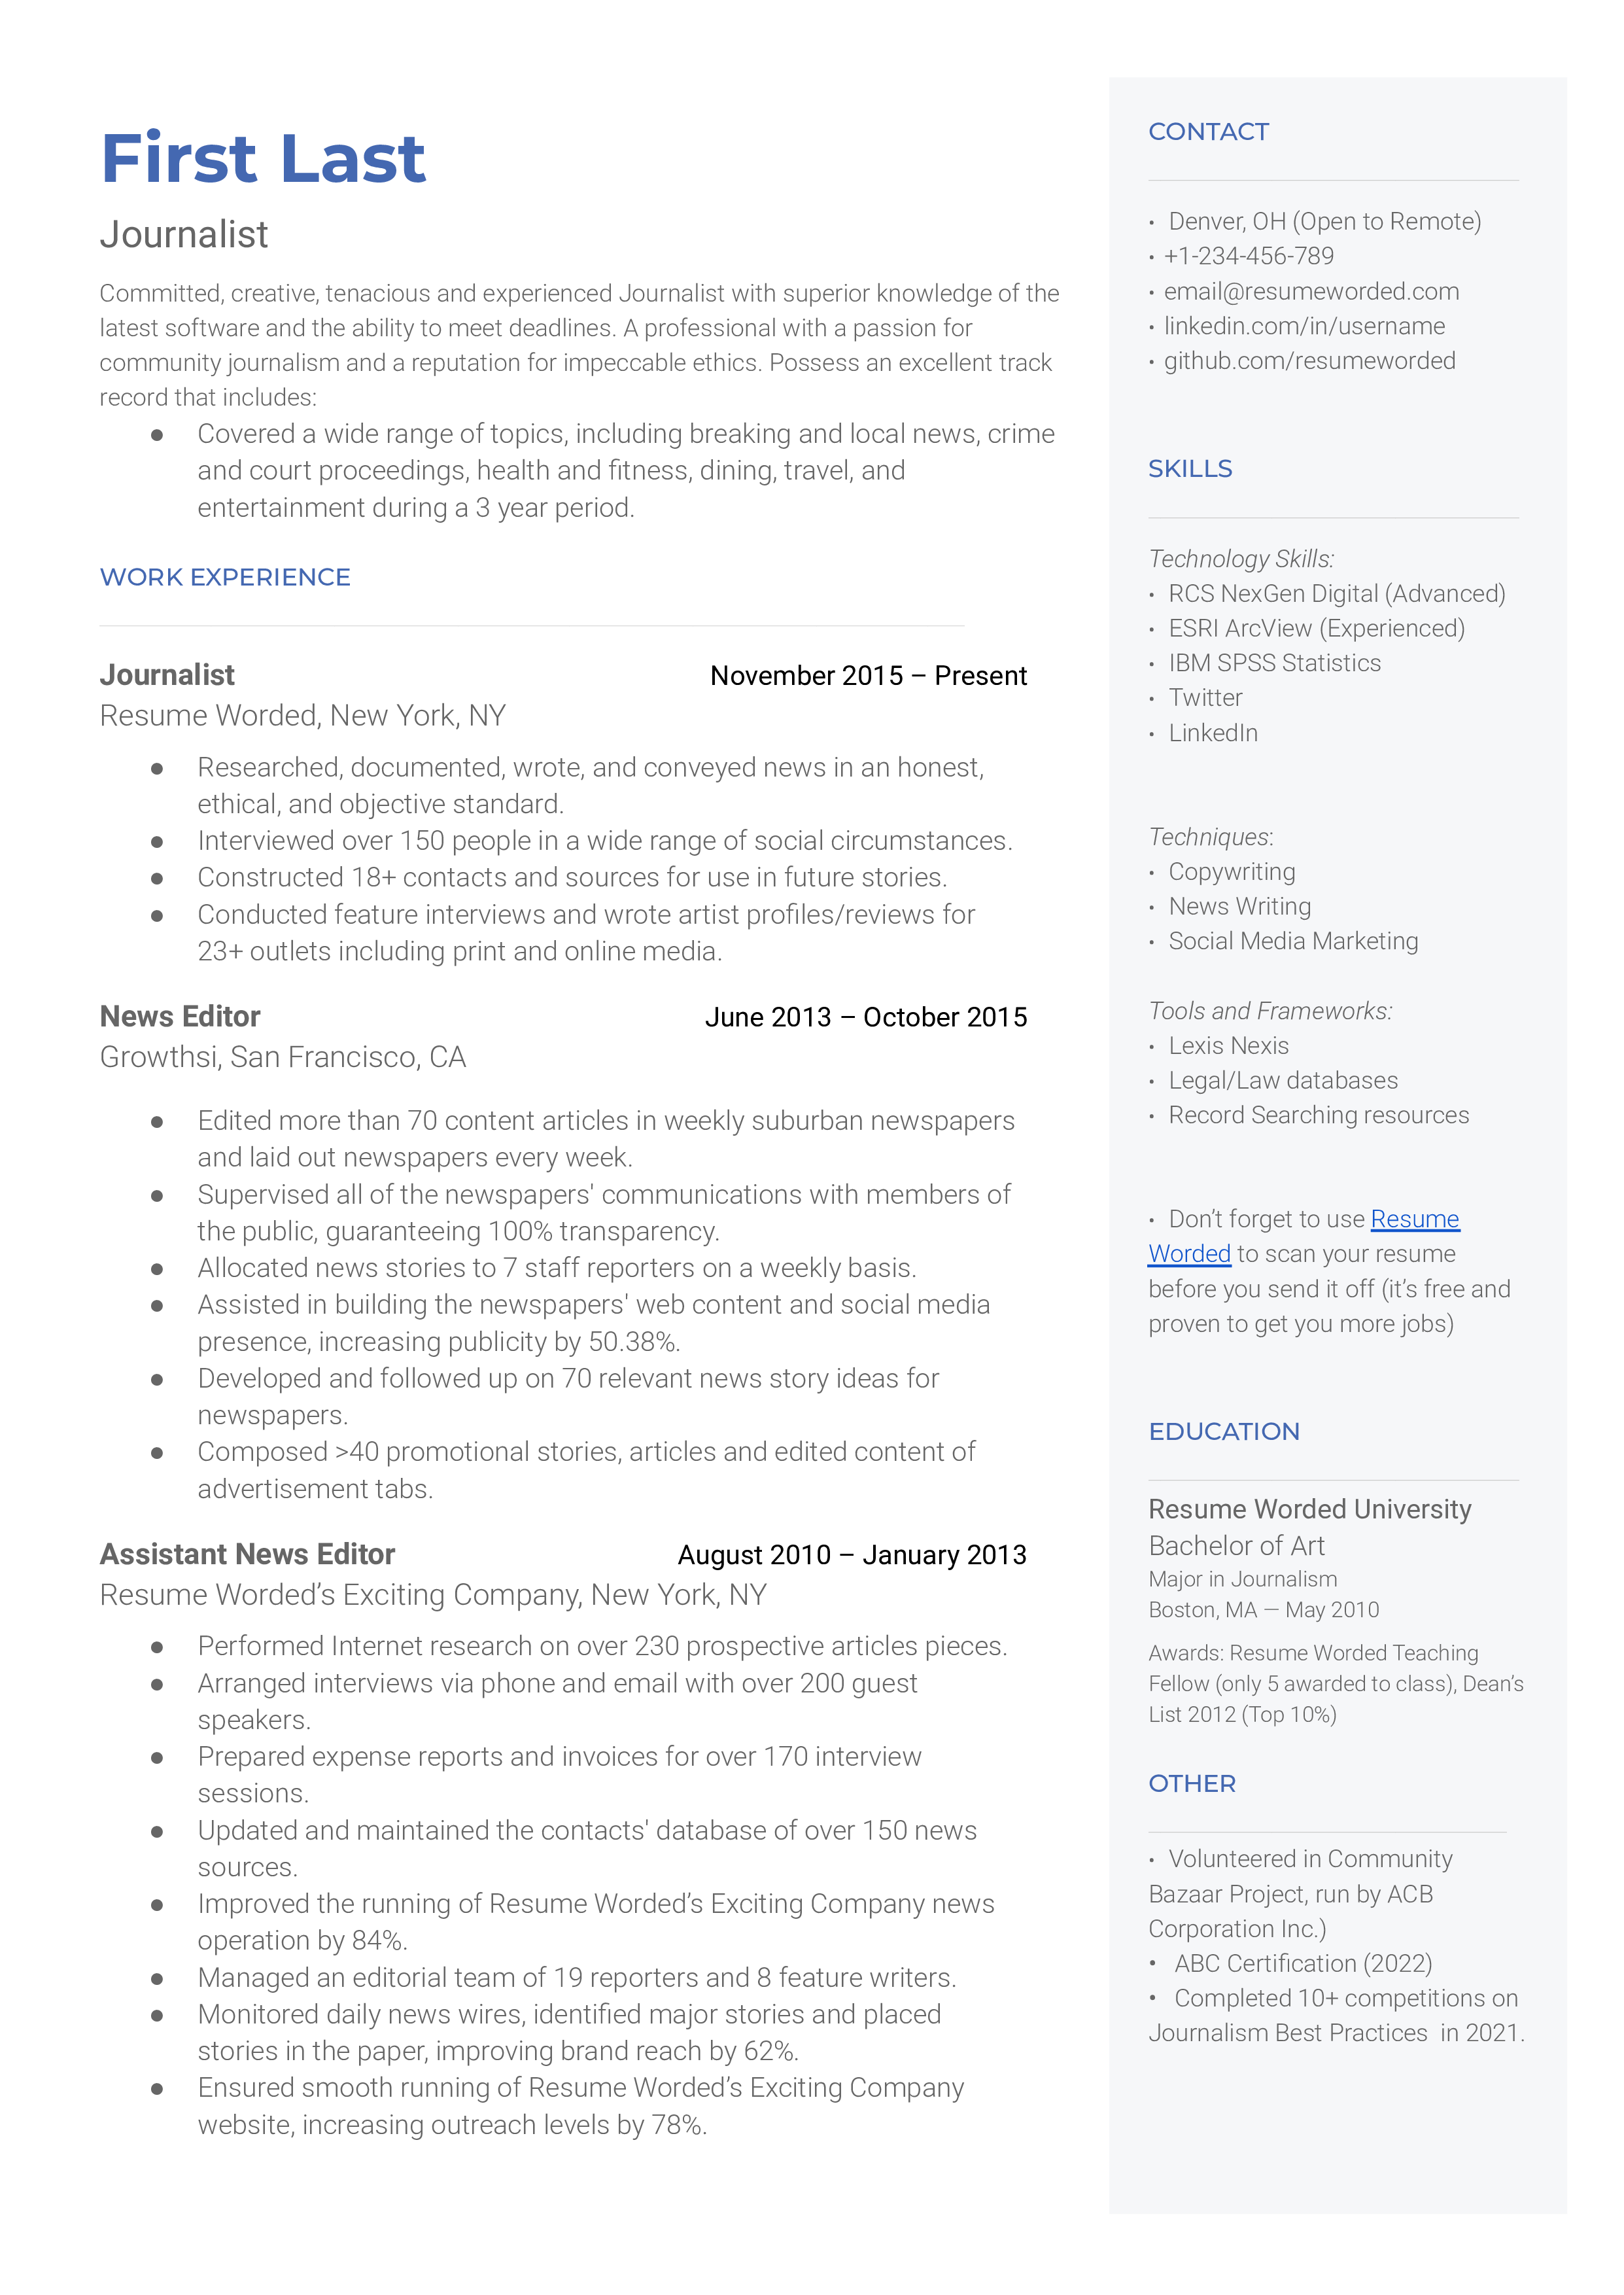 Journalism resume sample that highlightes applicant's variety of experience and educational background